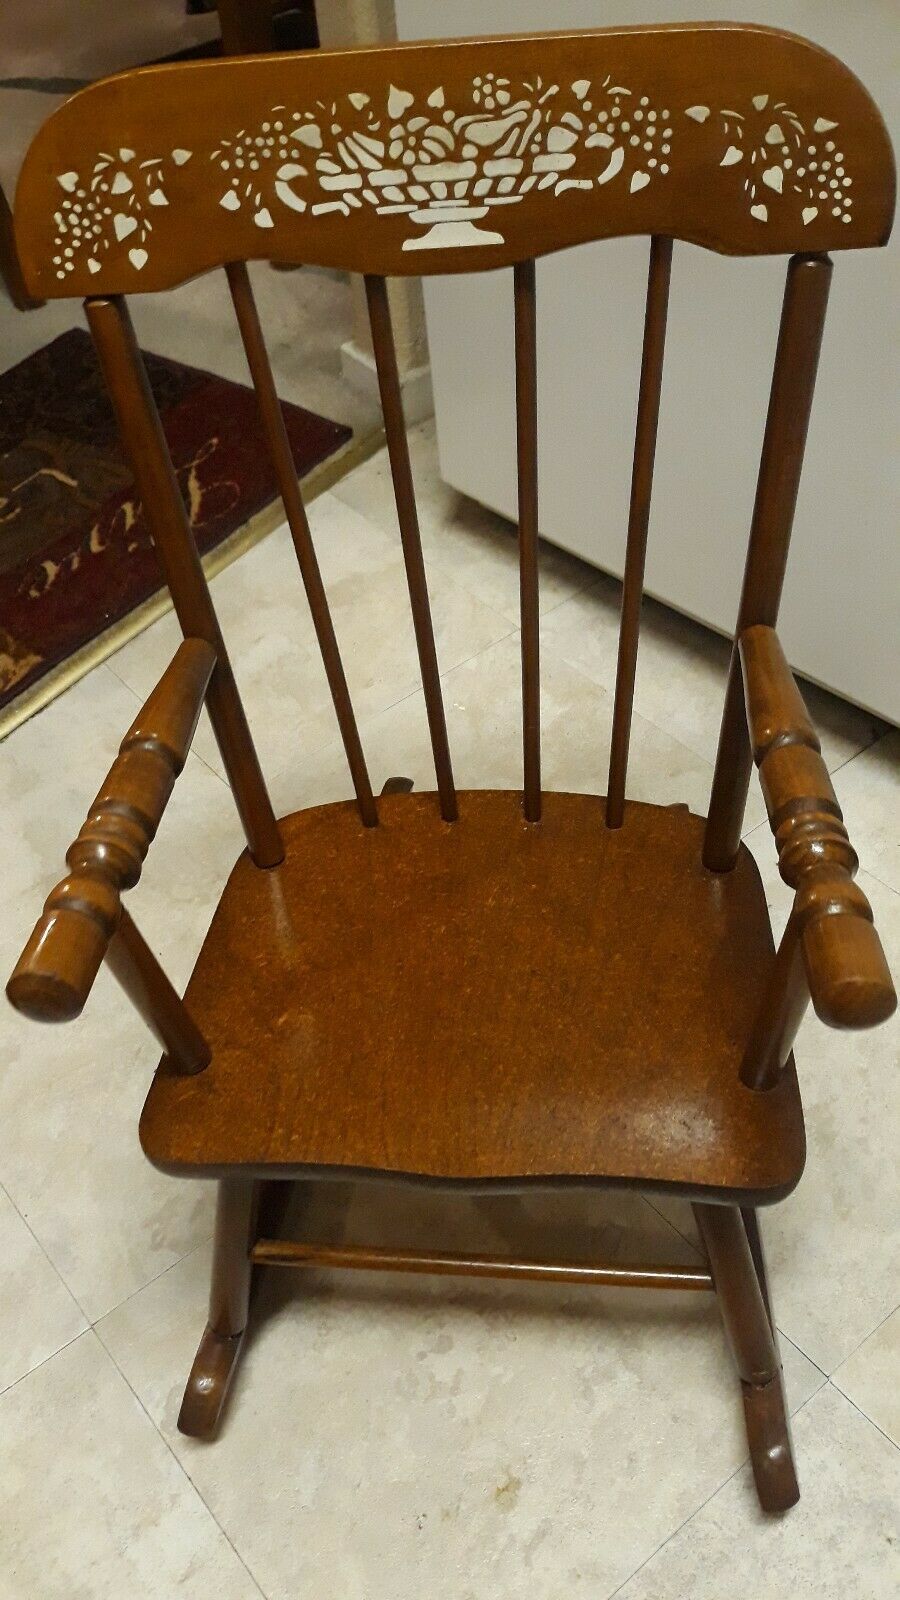 hedstrom child's rocking chair